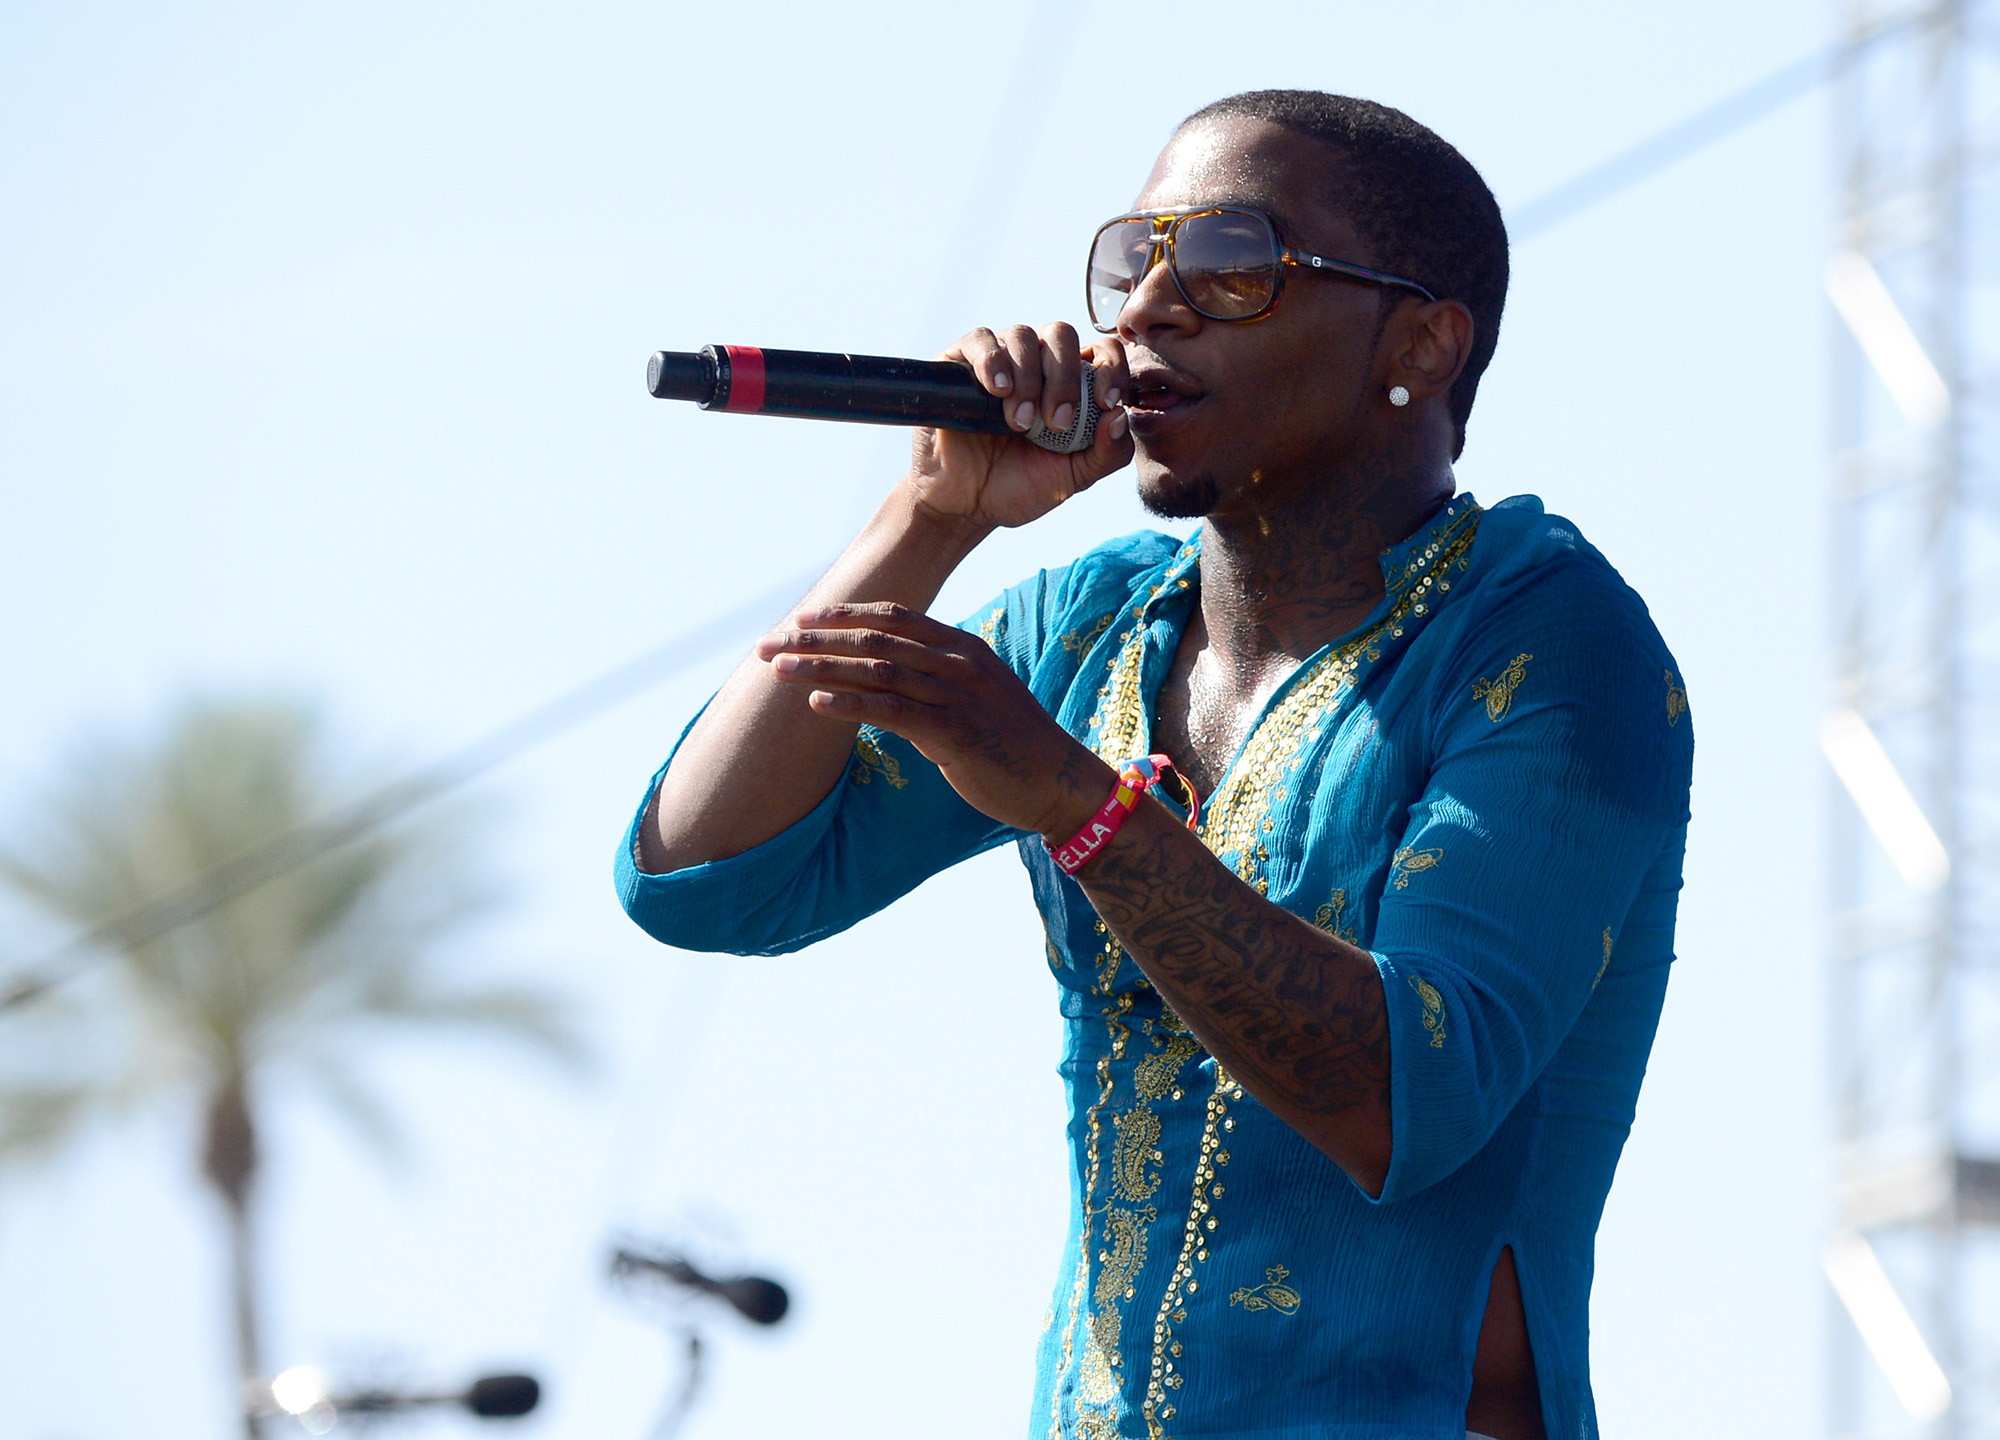 Lil B performs onstage during day 1 of the 2015 Coachella Valley Music &amp; Arts Festival (Weekend 1) at the Empire Polo Club on April 10, 2015 in Indio, California.  (Photo by Frazer Harrison/Getty Images for Coachella) (Frazer Harrison&mdash;Getty Images for Coachella)